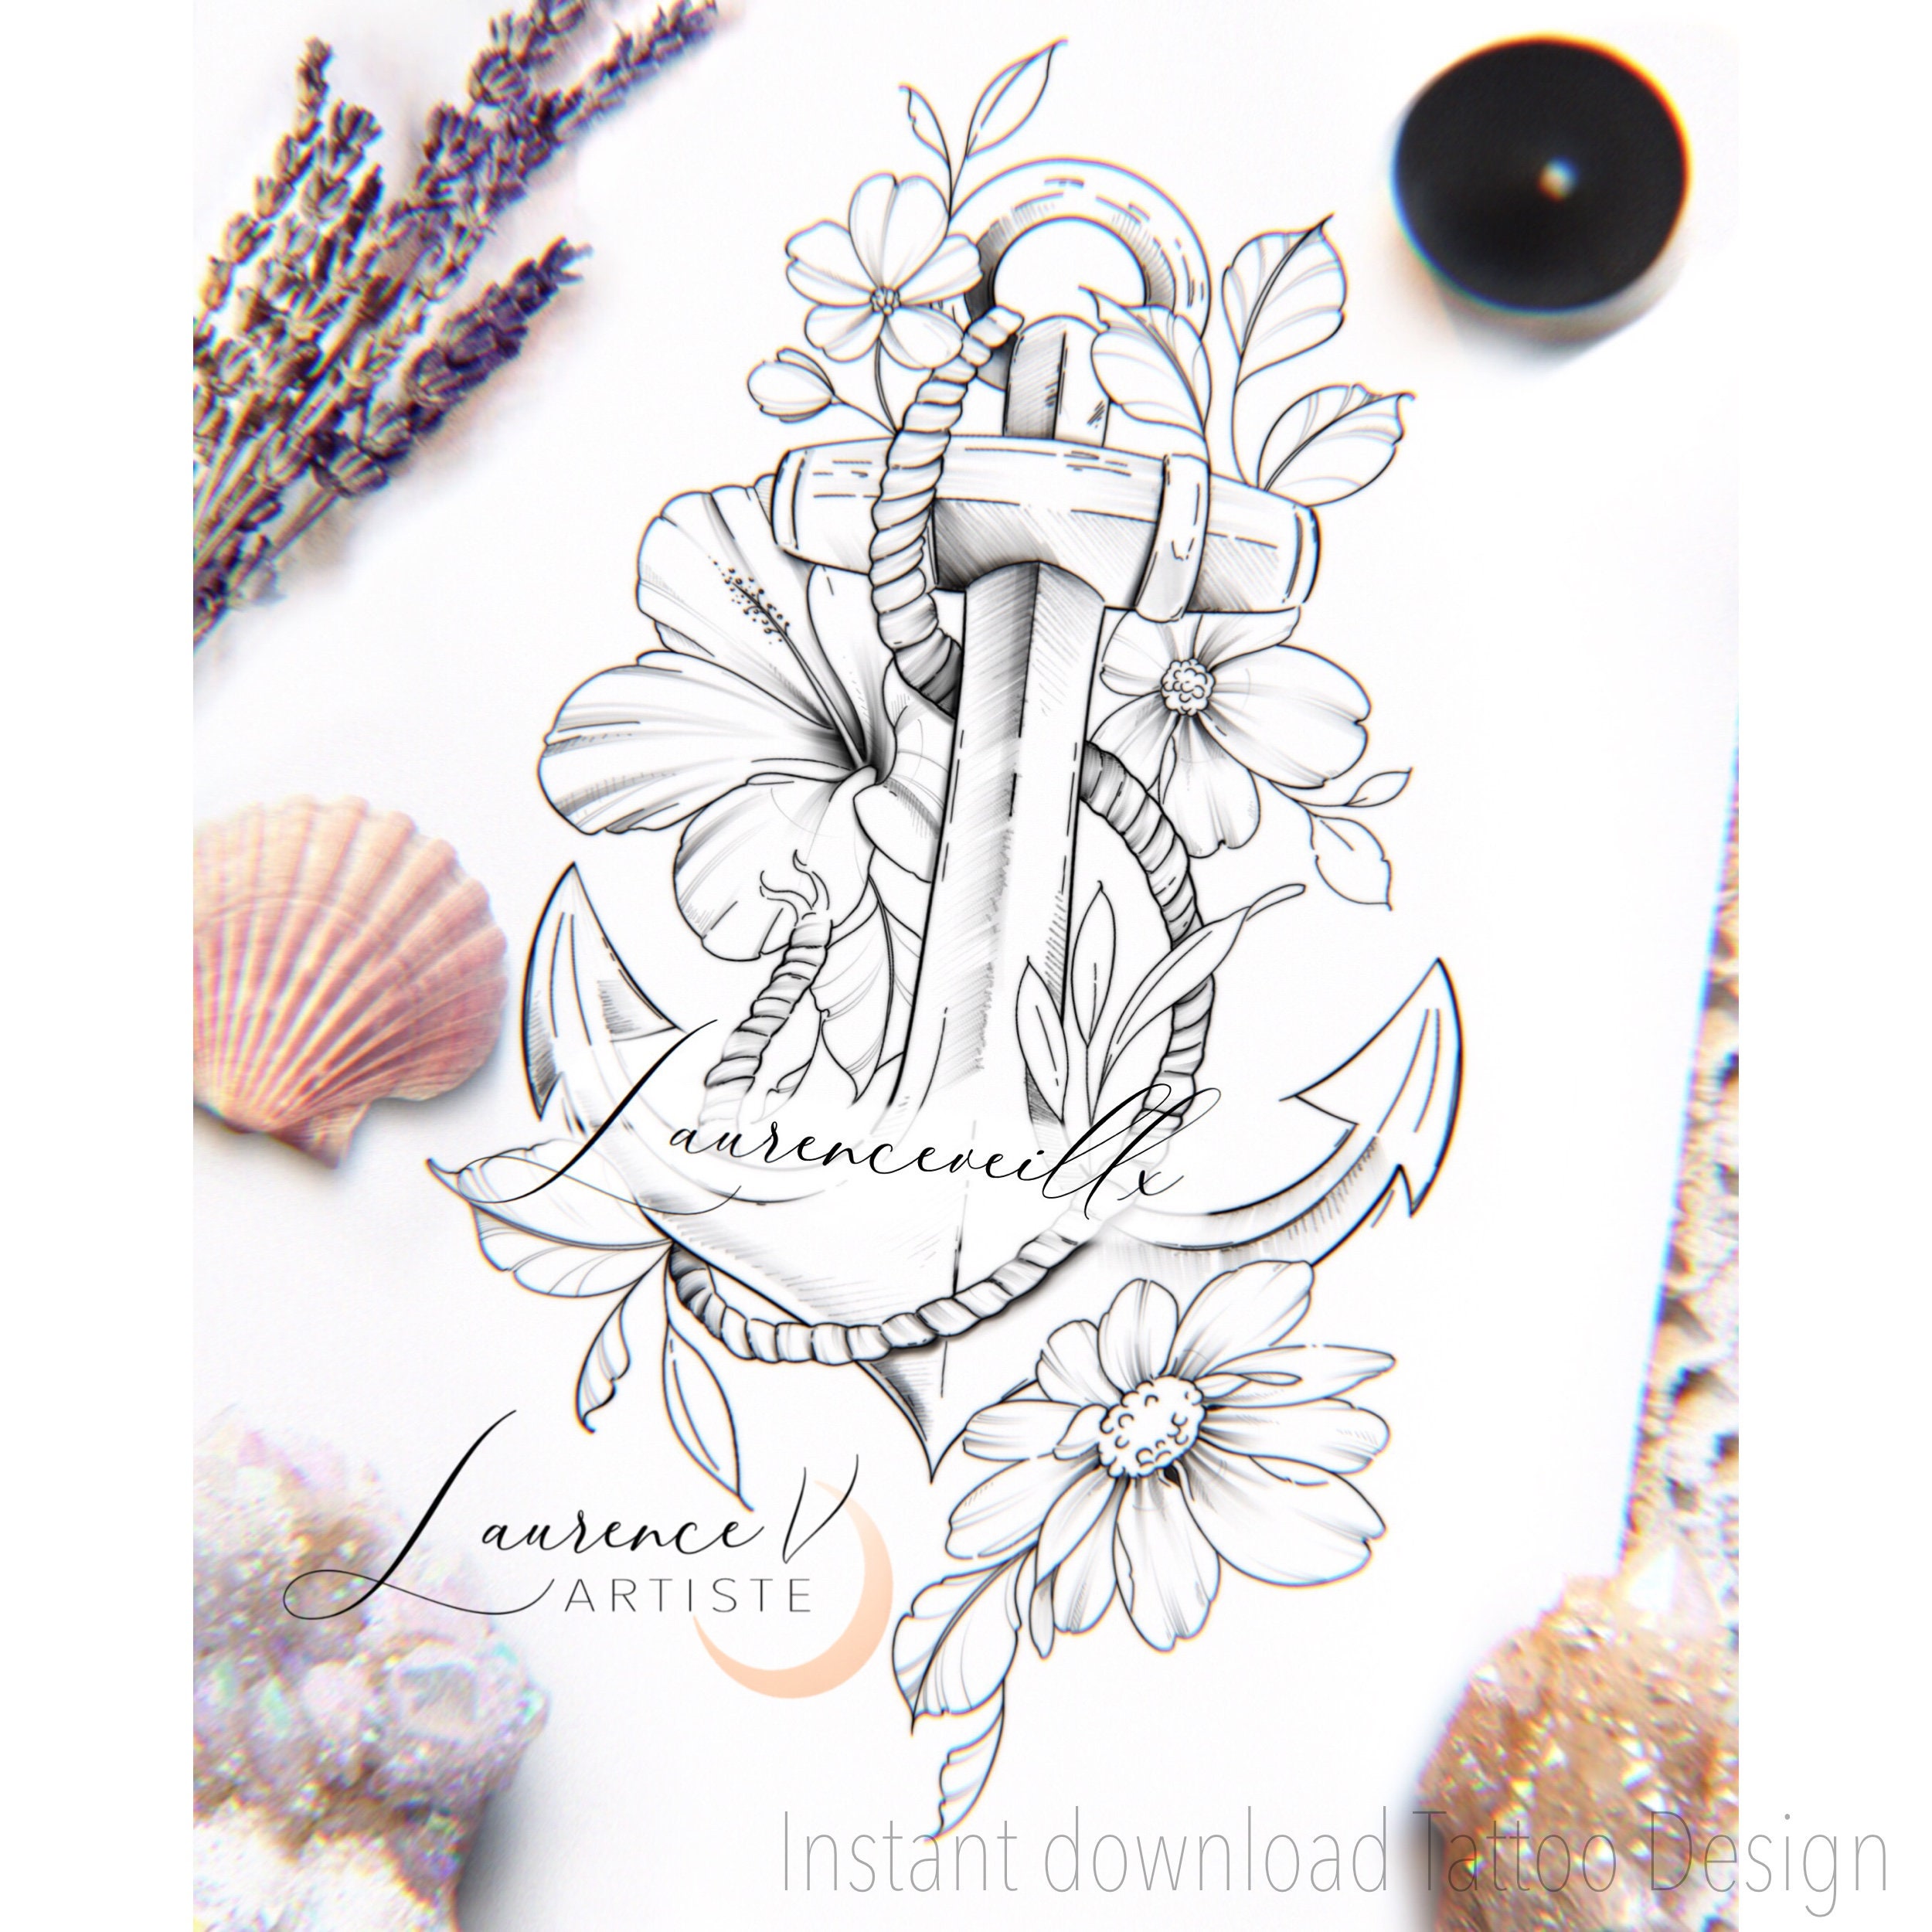 Update 72+ anchor tattoo with flowers latest - esthdonghoadian